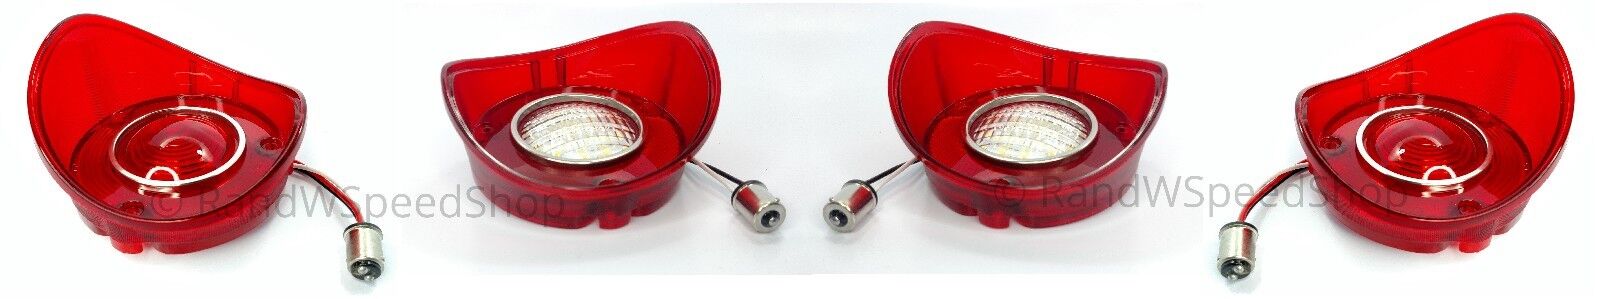 Set LED Tail Lights & Reverse Lamps for 1972 Chevy Chevelle SS & Malibu